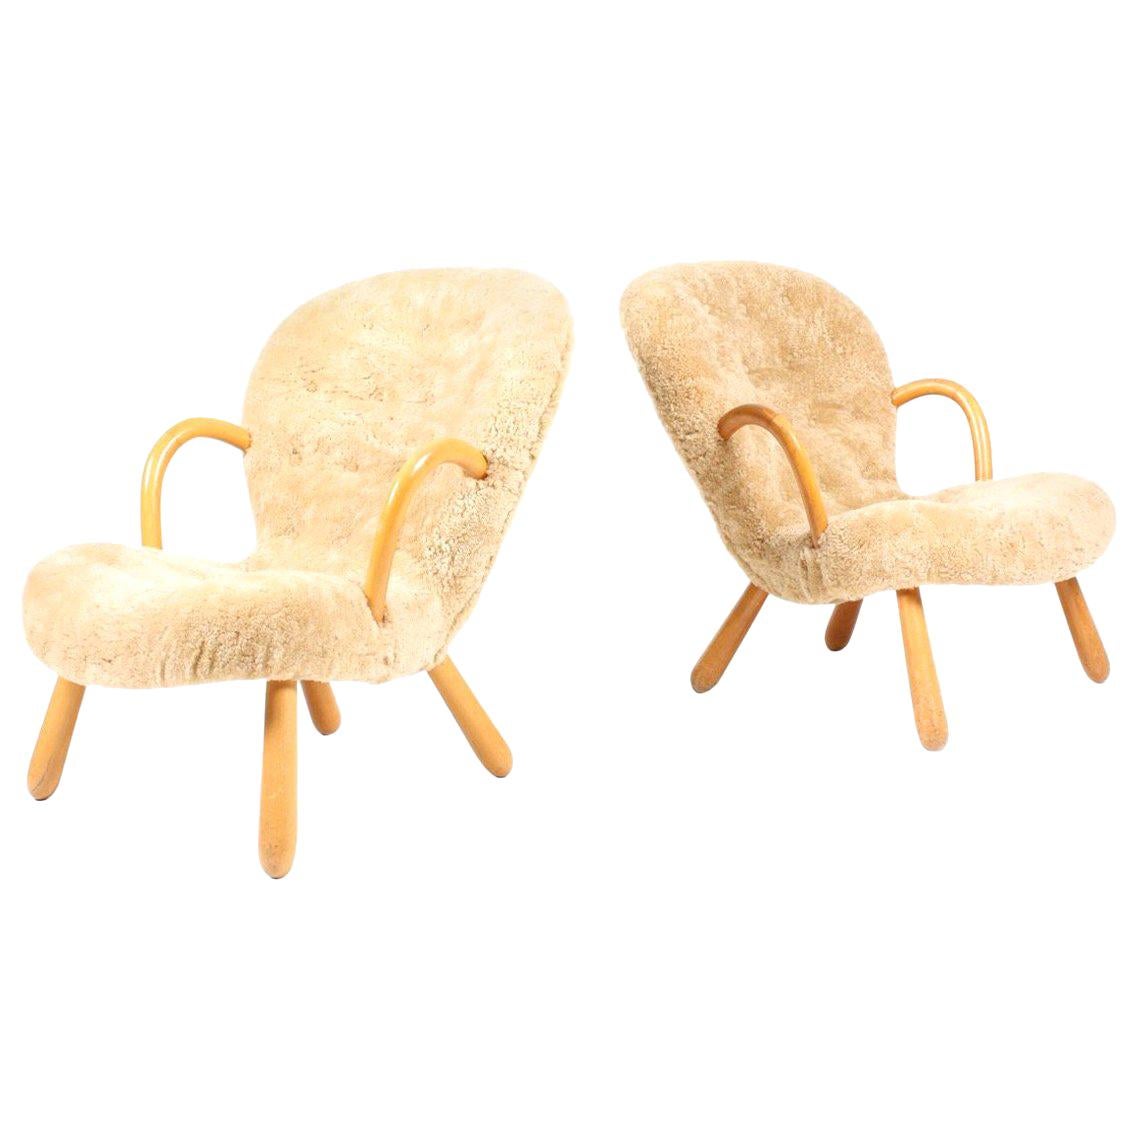 Pair of Vintage Clam Chairs by Philip Arctander, Danish modern 1940s